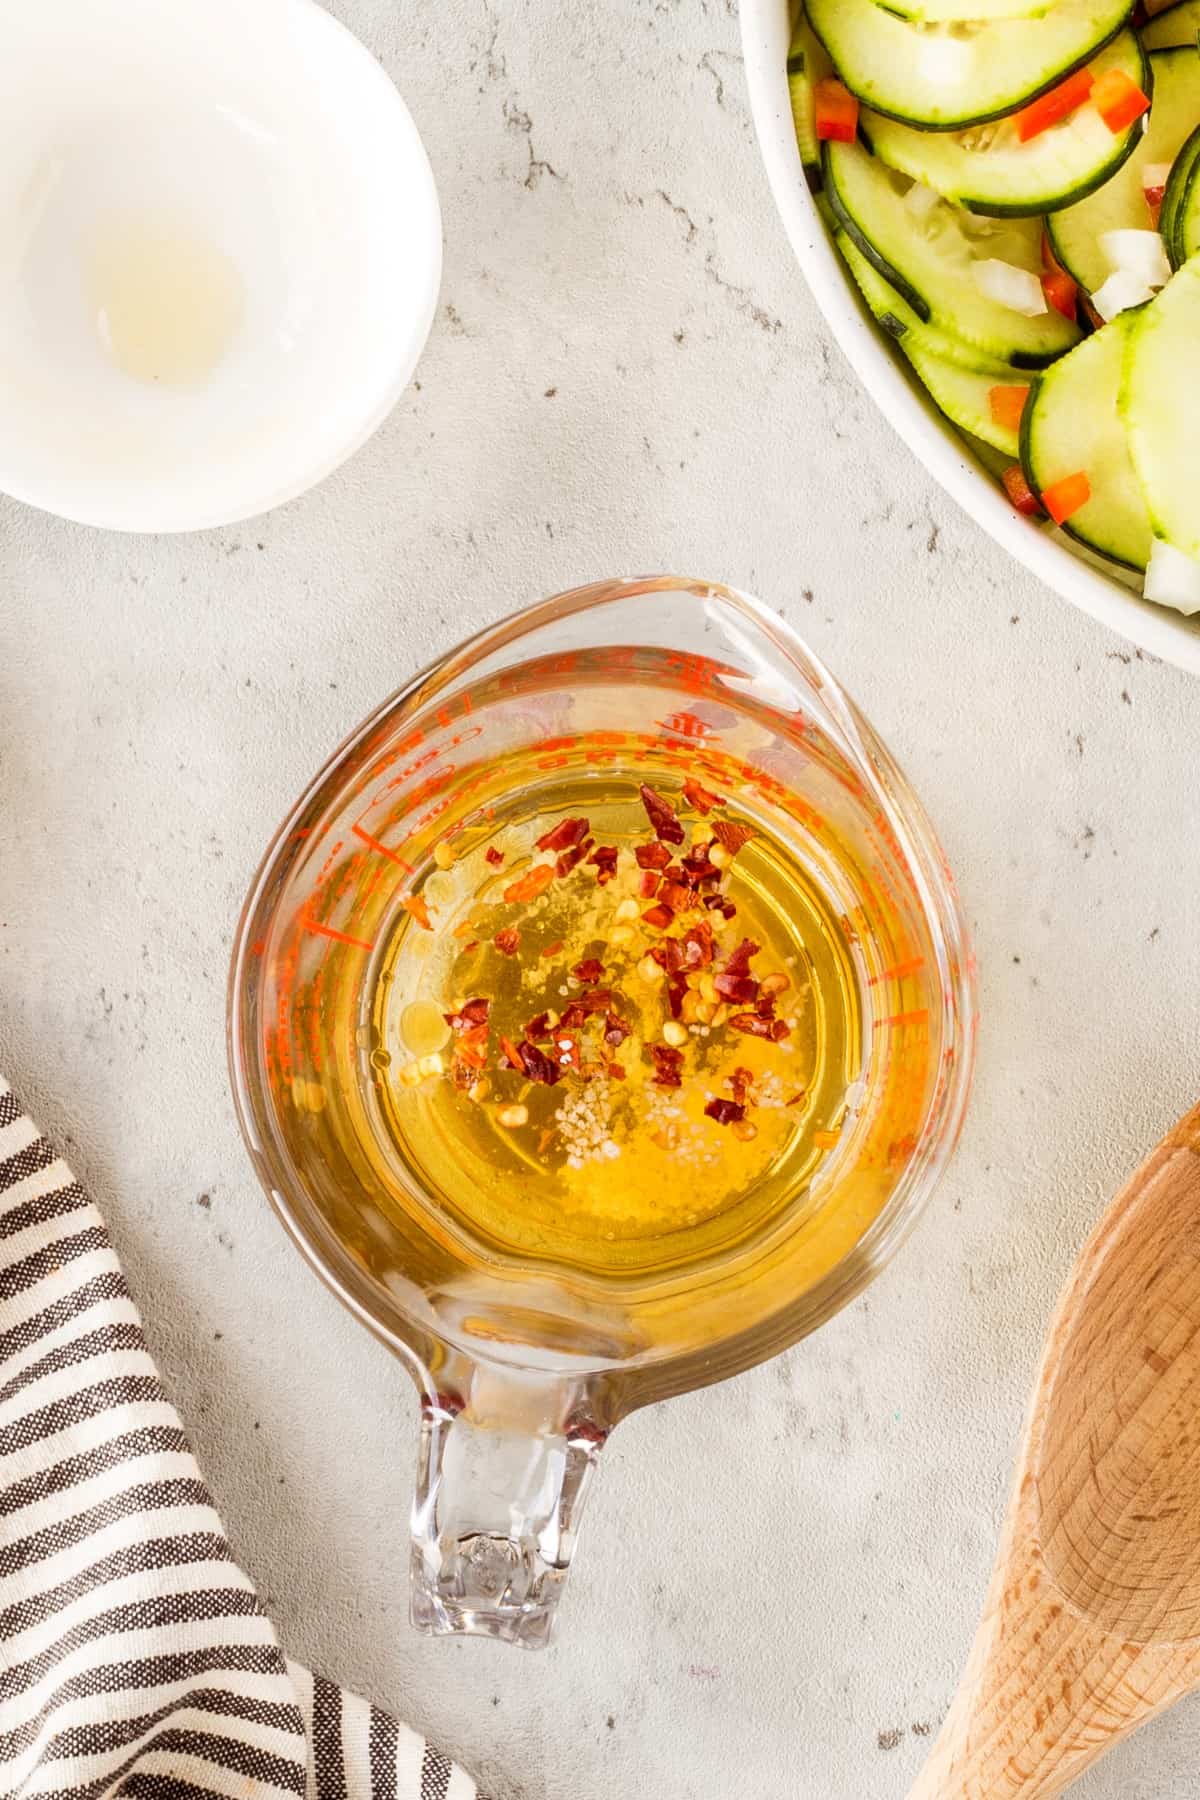 Salad dressing in a measuring cup